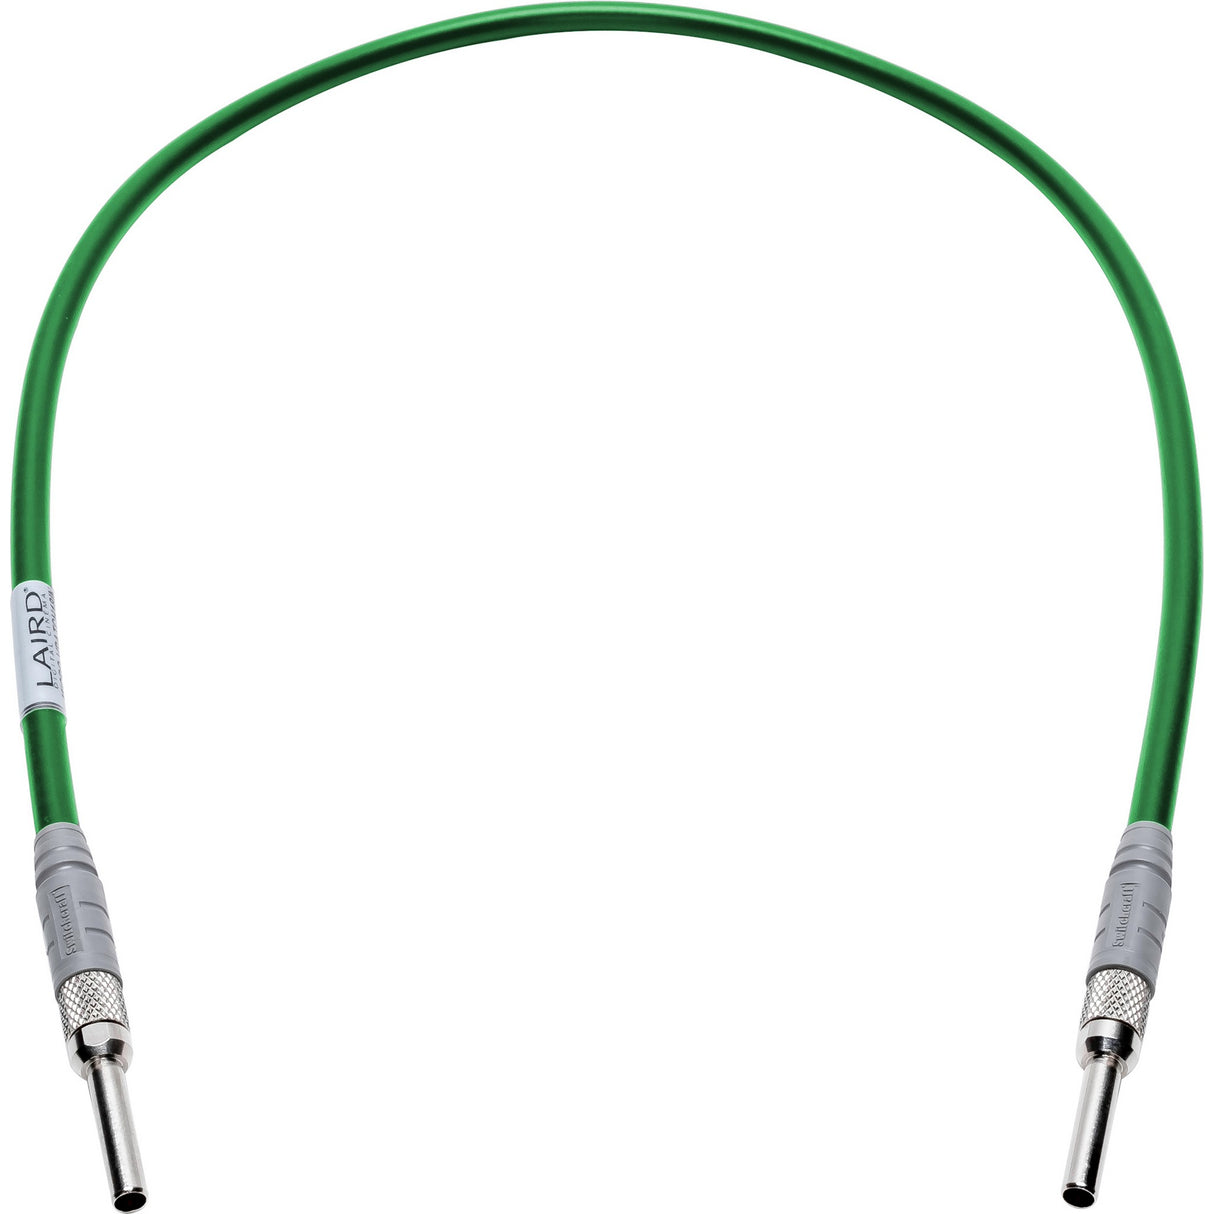 Laird MICRO-VPATCH-010GN 12G-SDI Micro Video Patch Cable, Military Green, 10-Feet